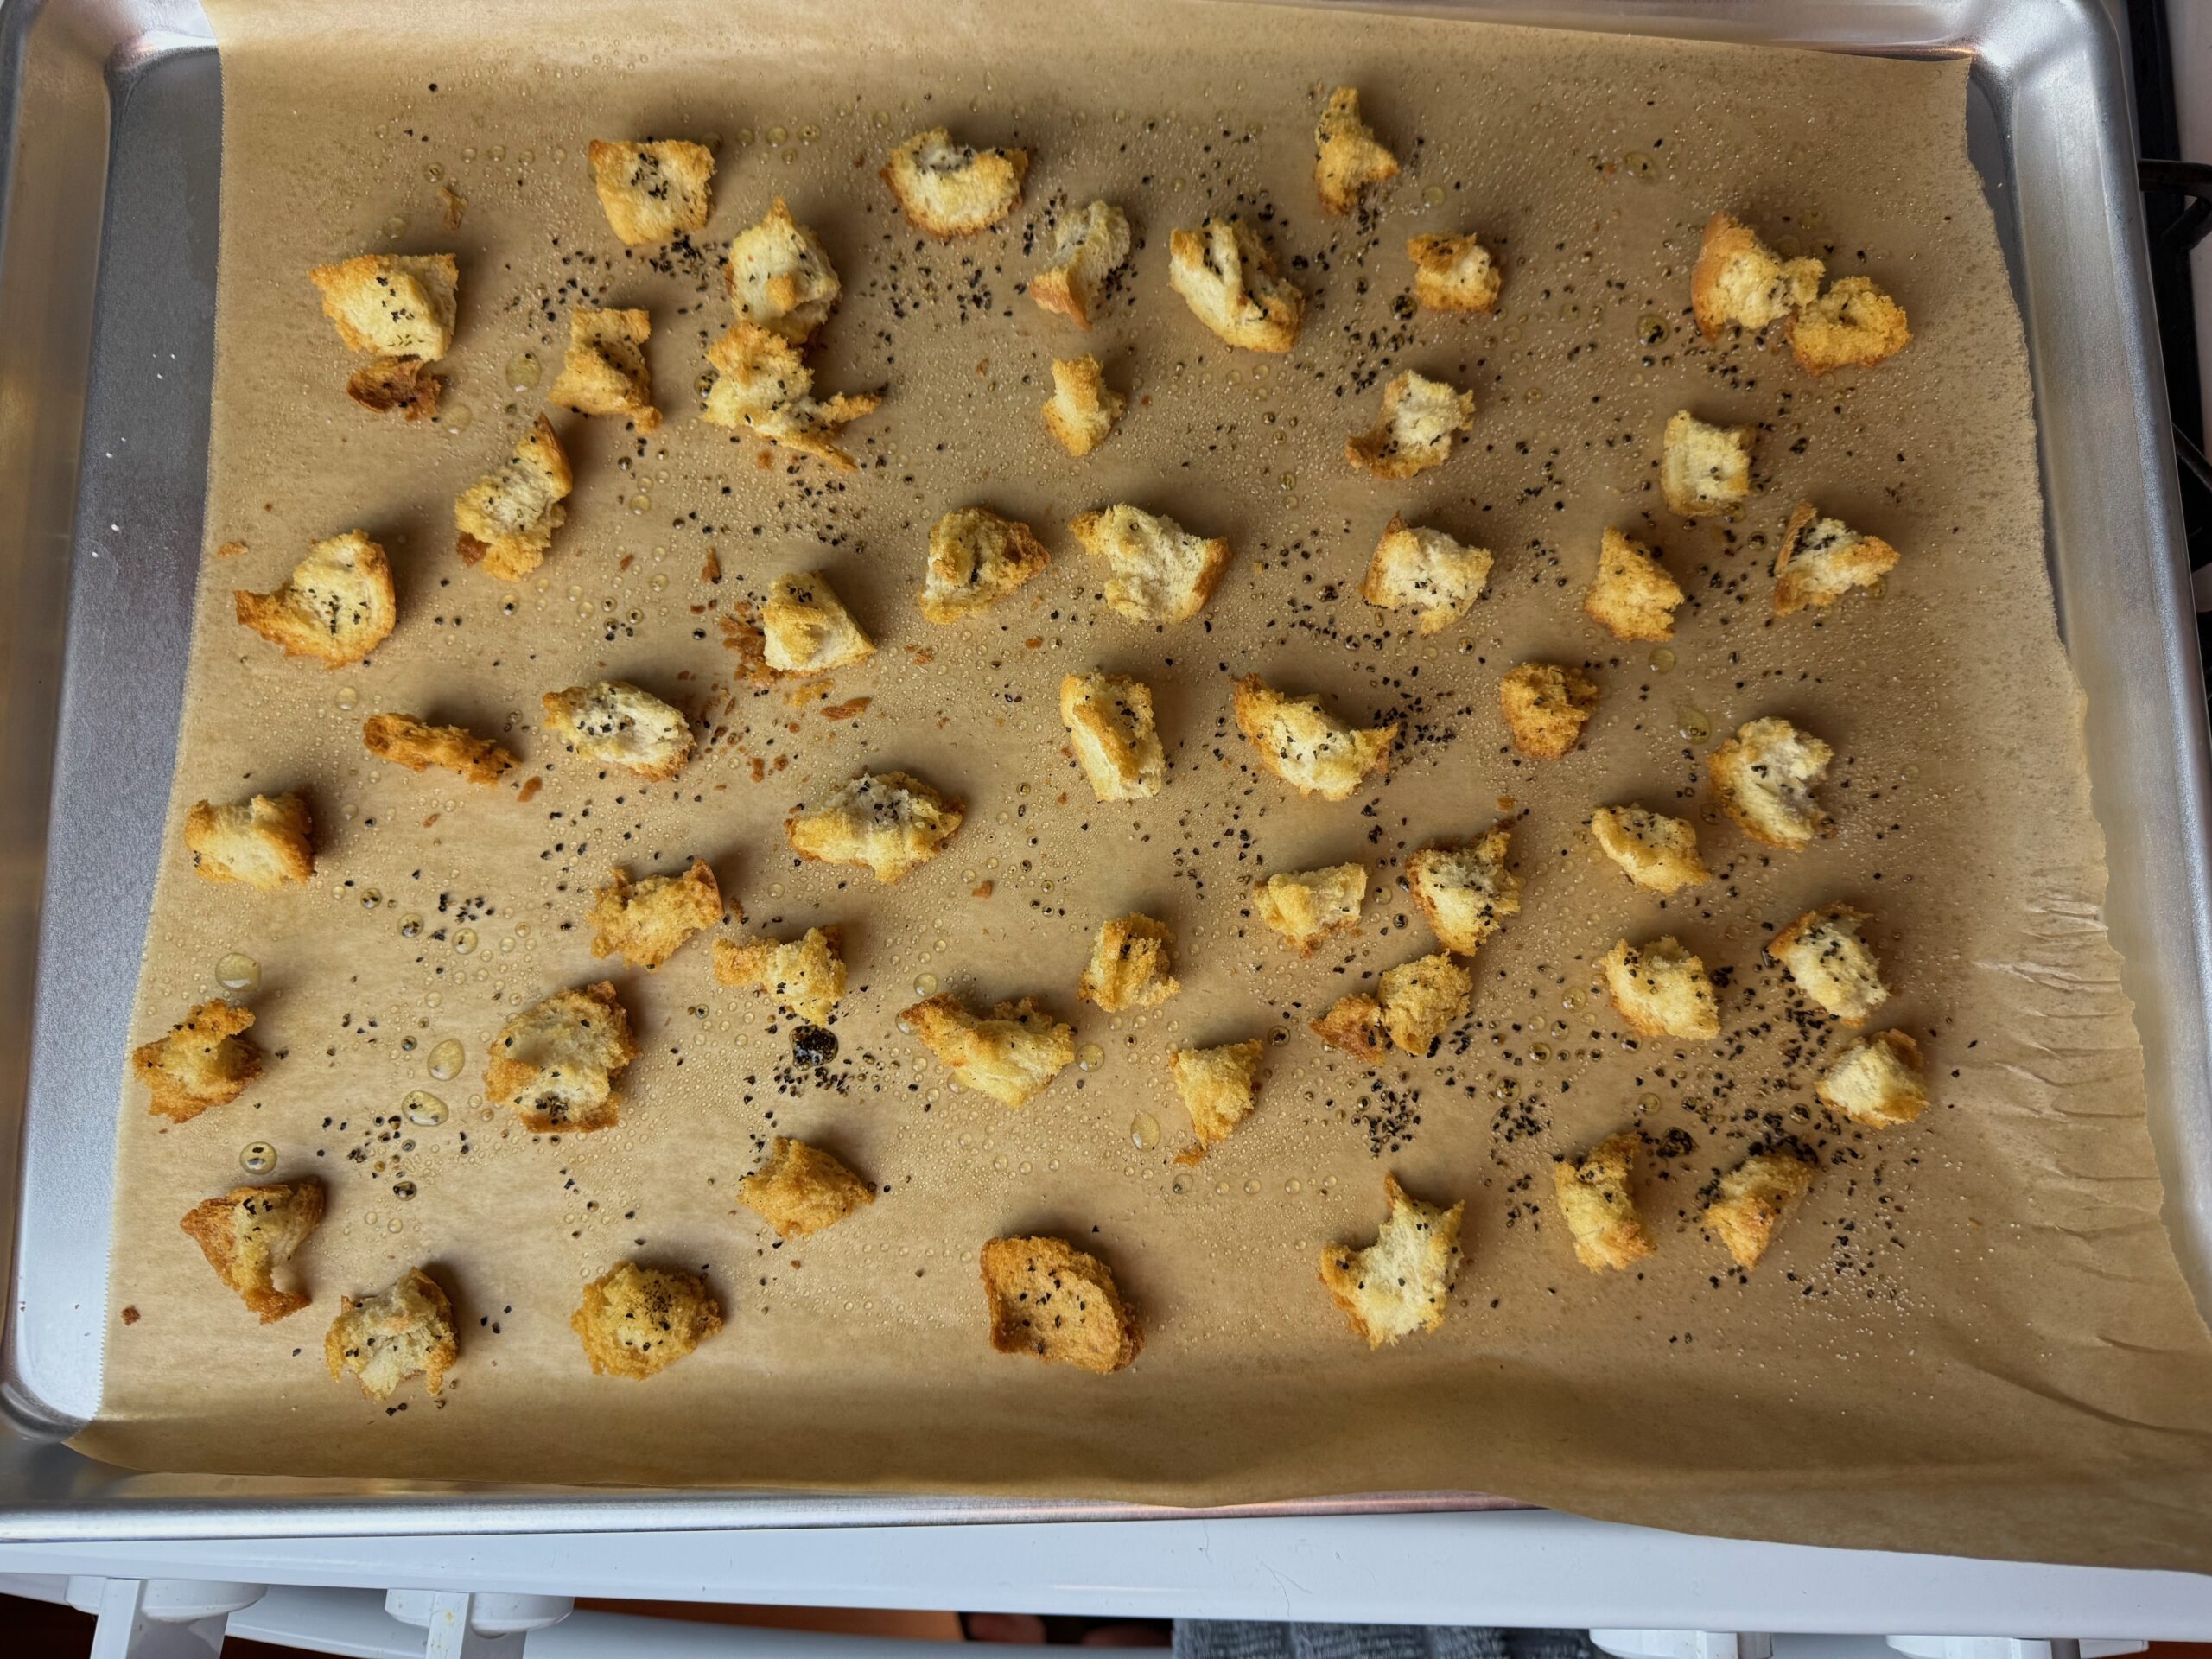 homemade croutons baked to perfection